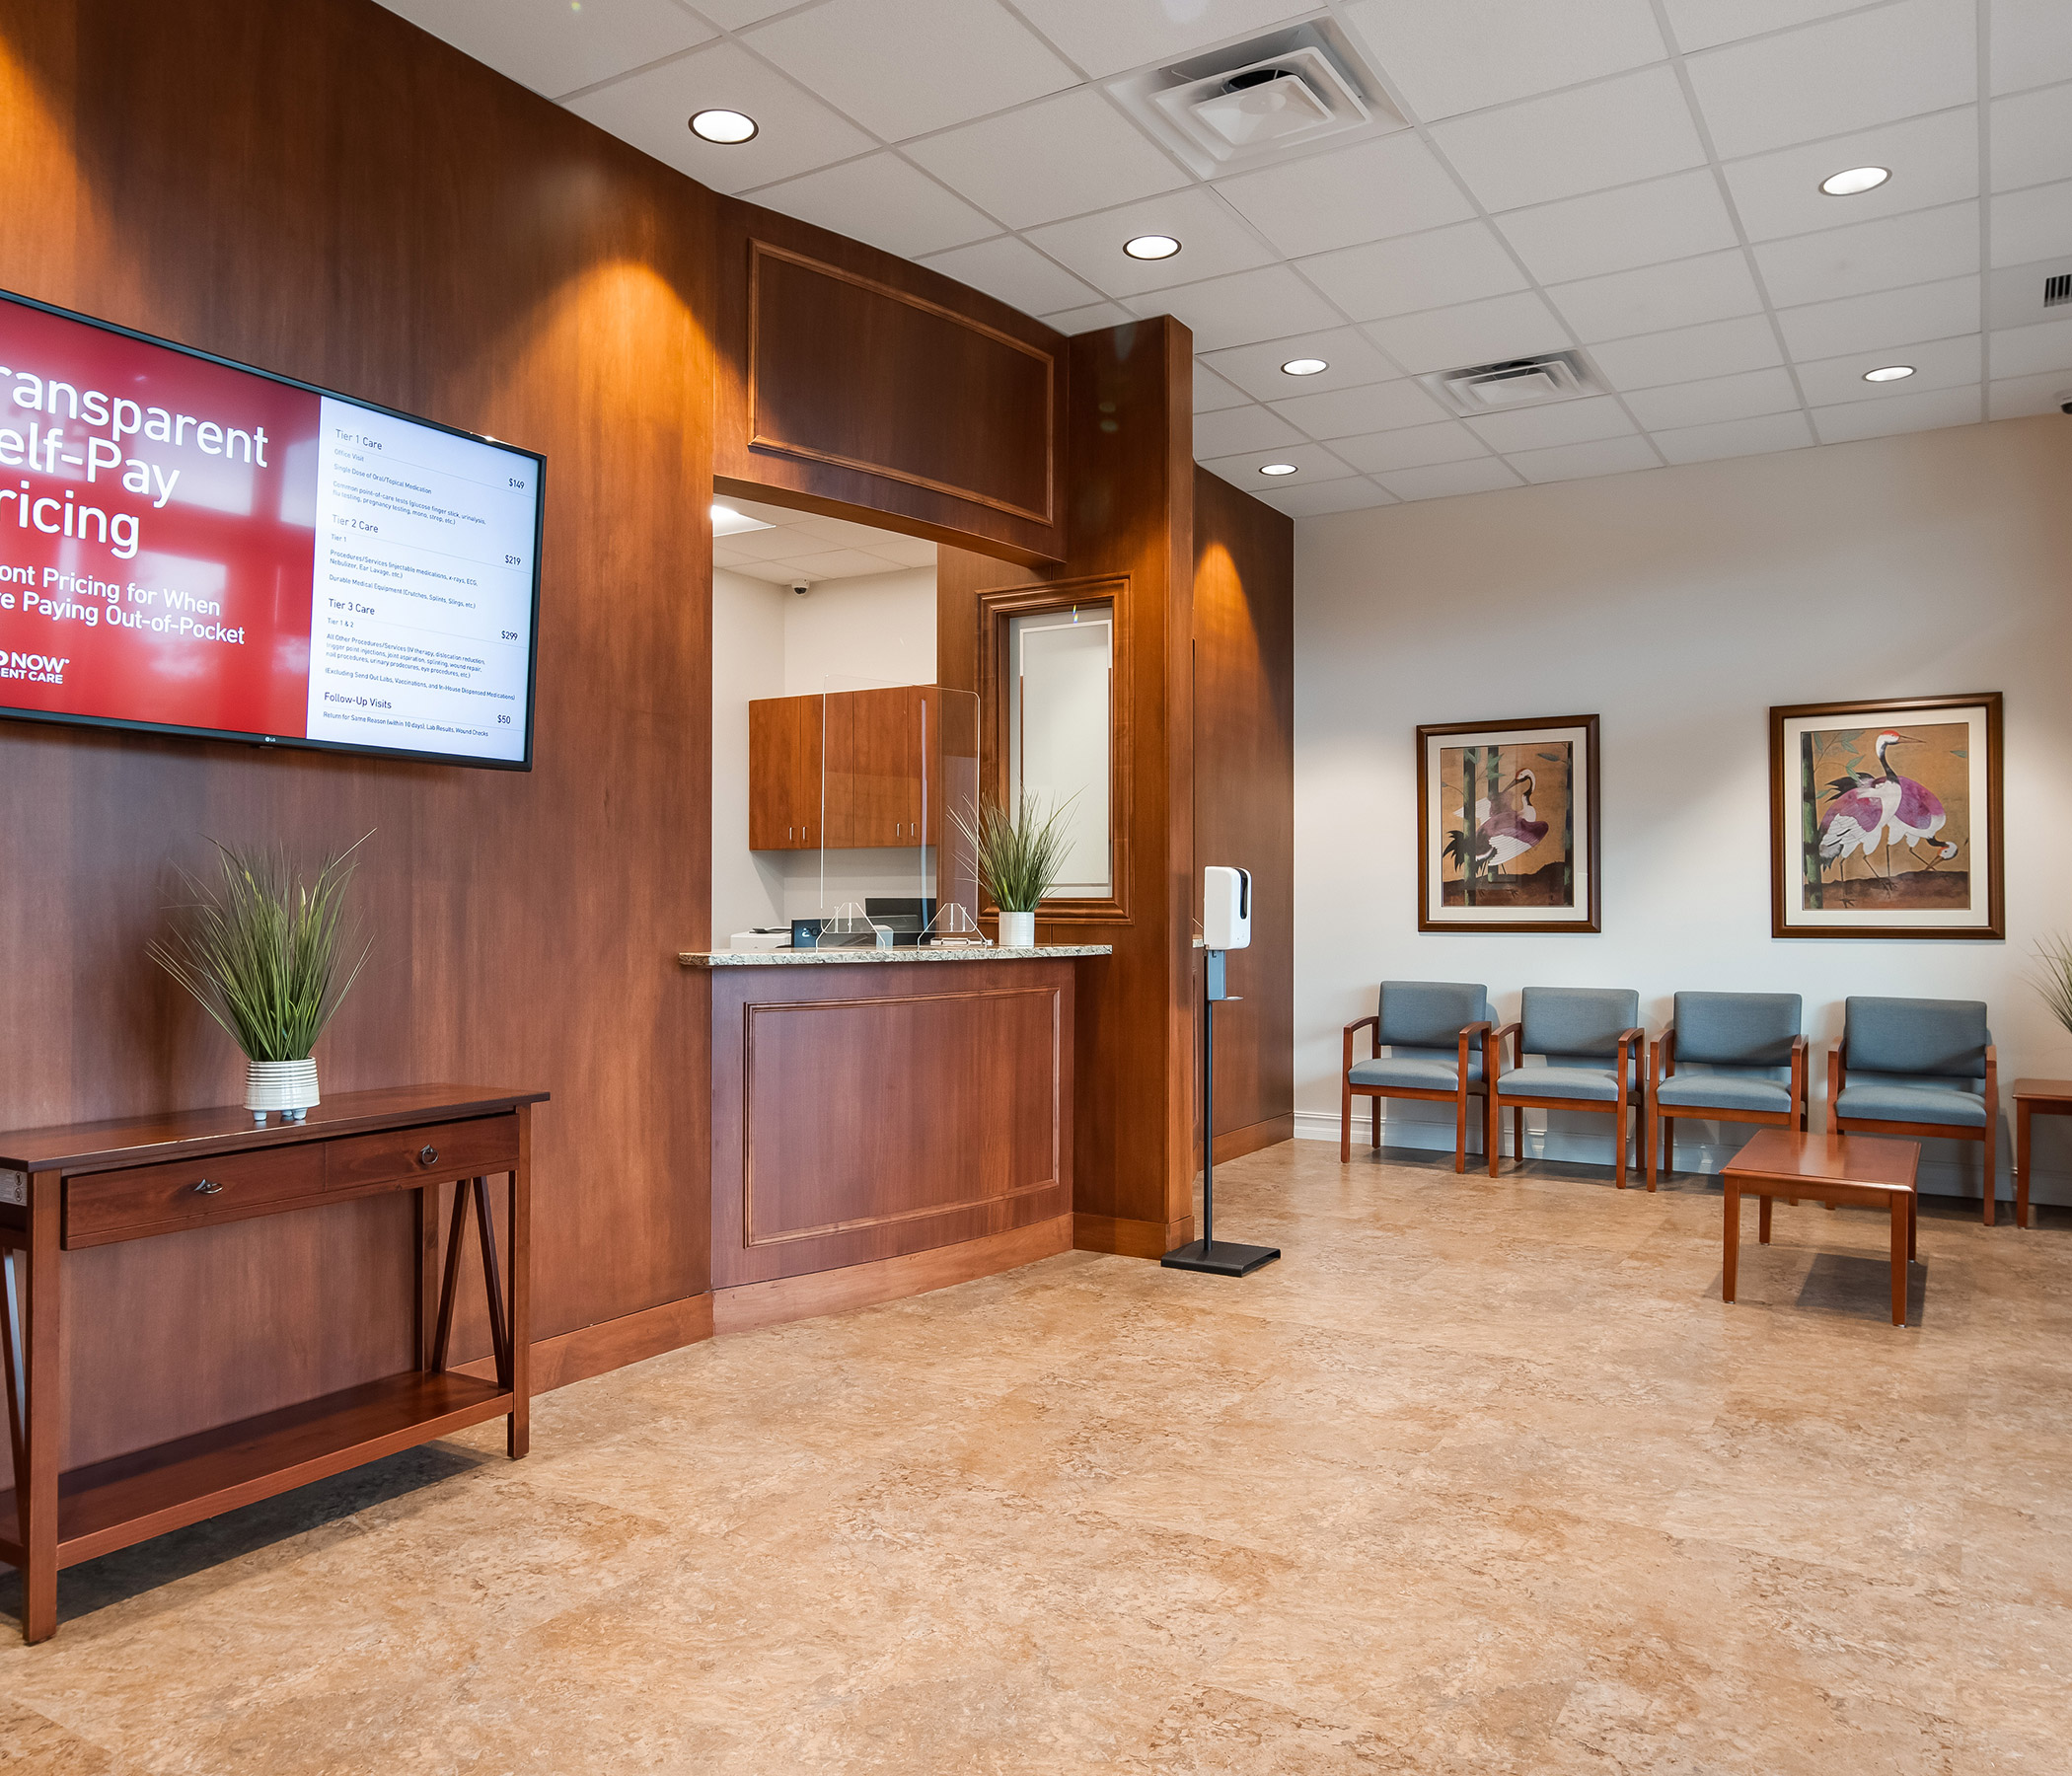 Md Now Urgent Care, No Appt. Necessary, walk-Ins welcome.